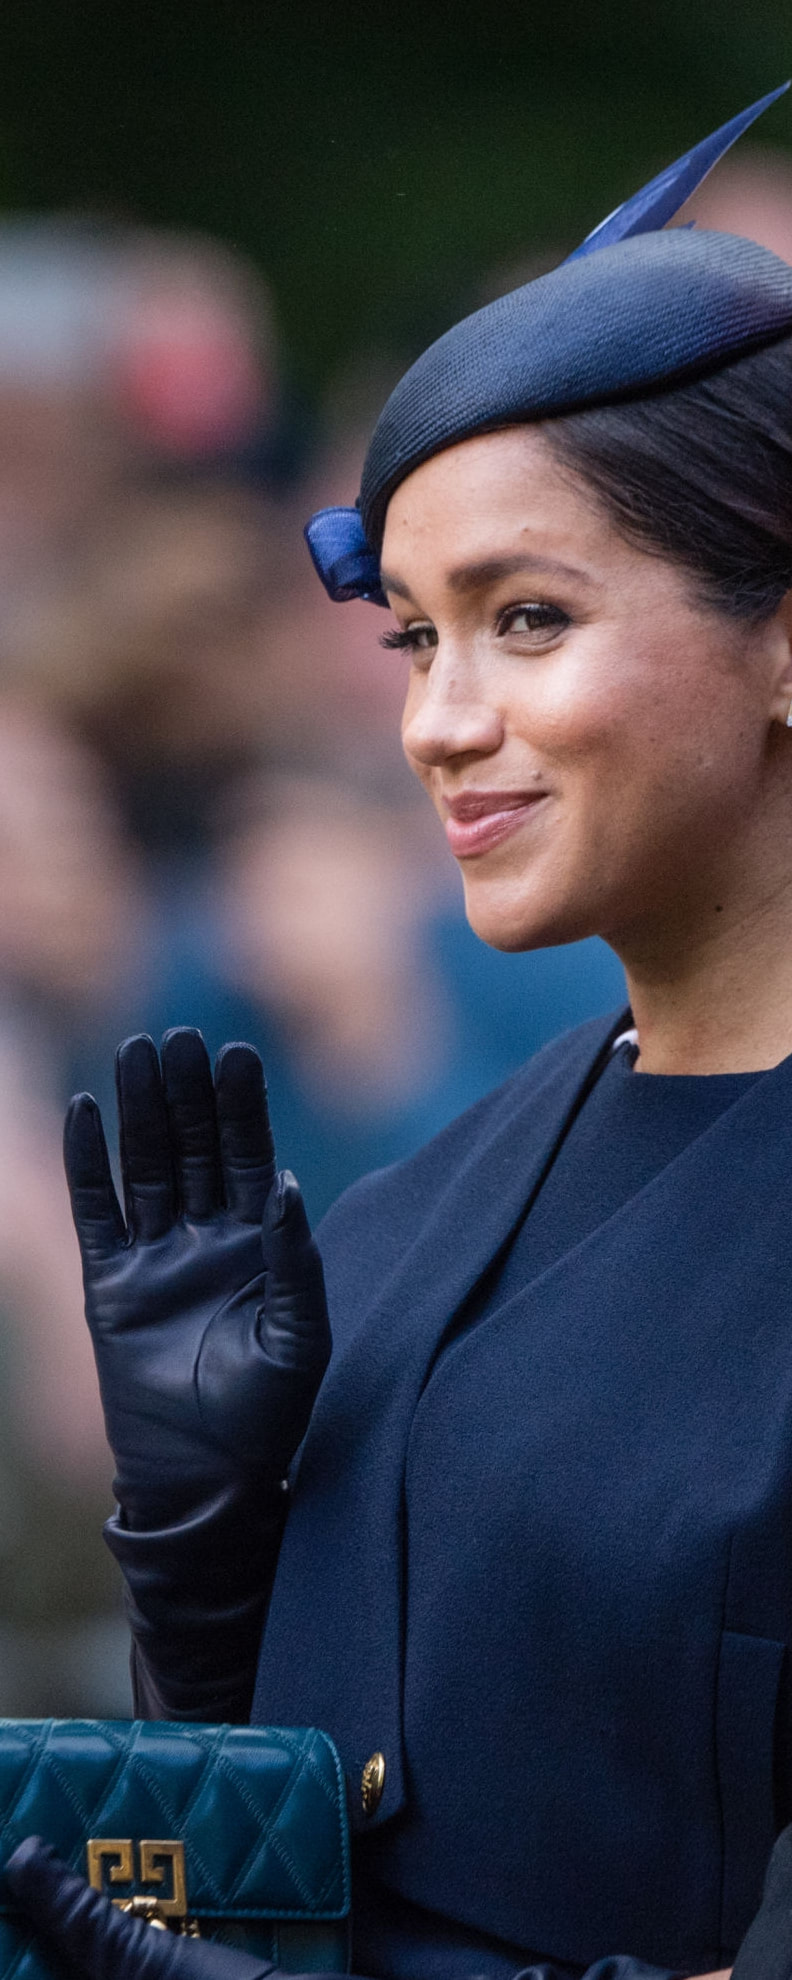 Gucci Broadway Clutch as seen on Meghan Markle, the Duchess of Sussex